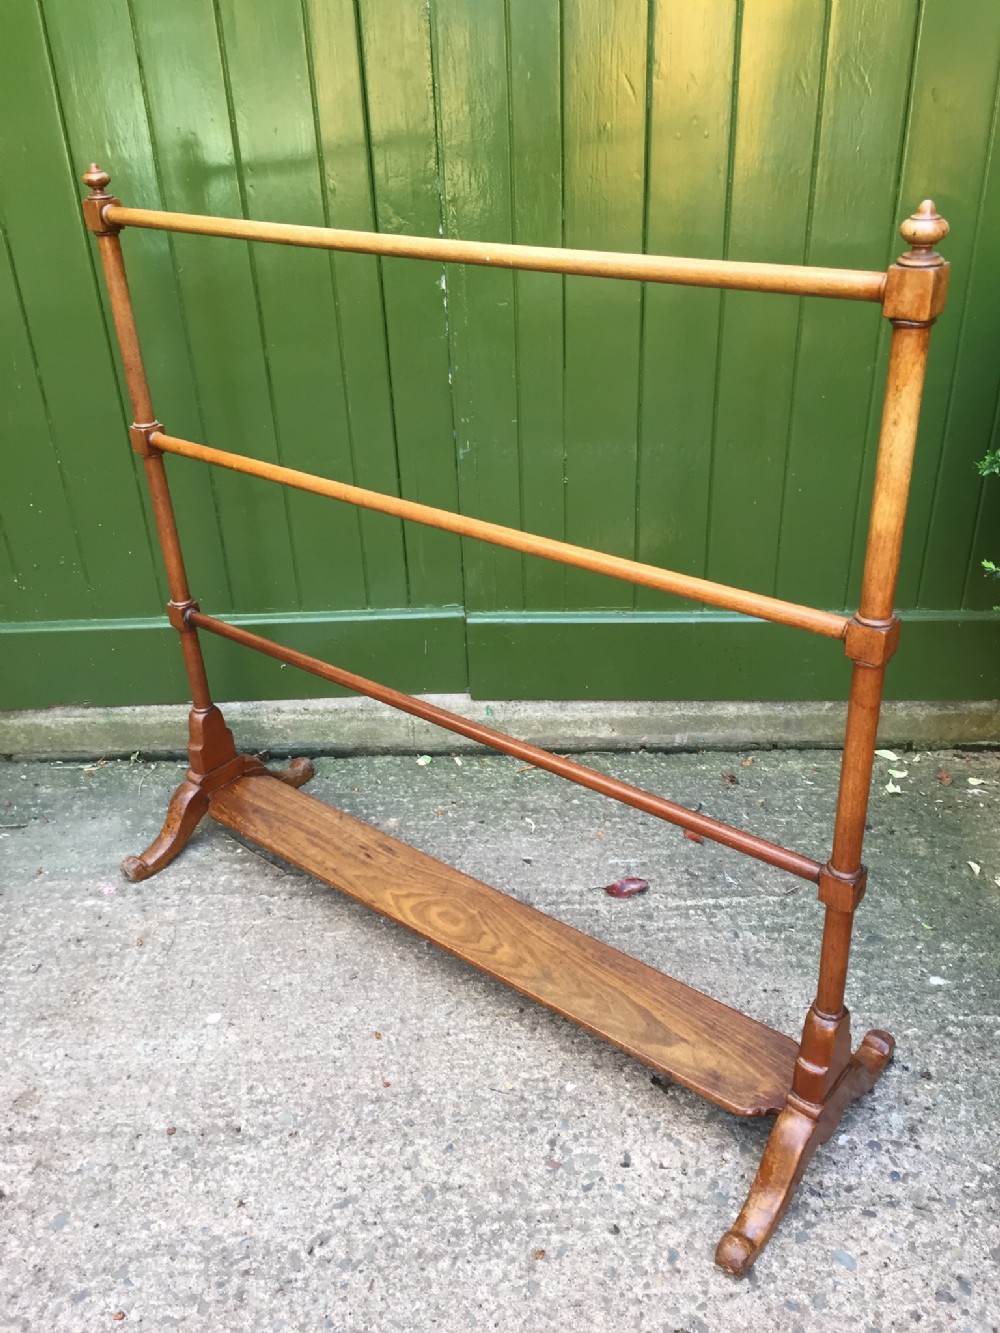 early c19th regency period mahogany 'countryhouse' clothes towel or garment rail of unusually large scale